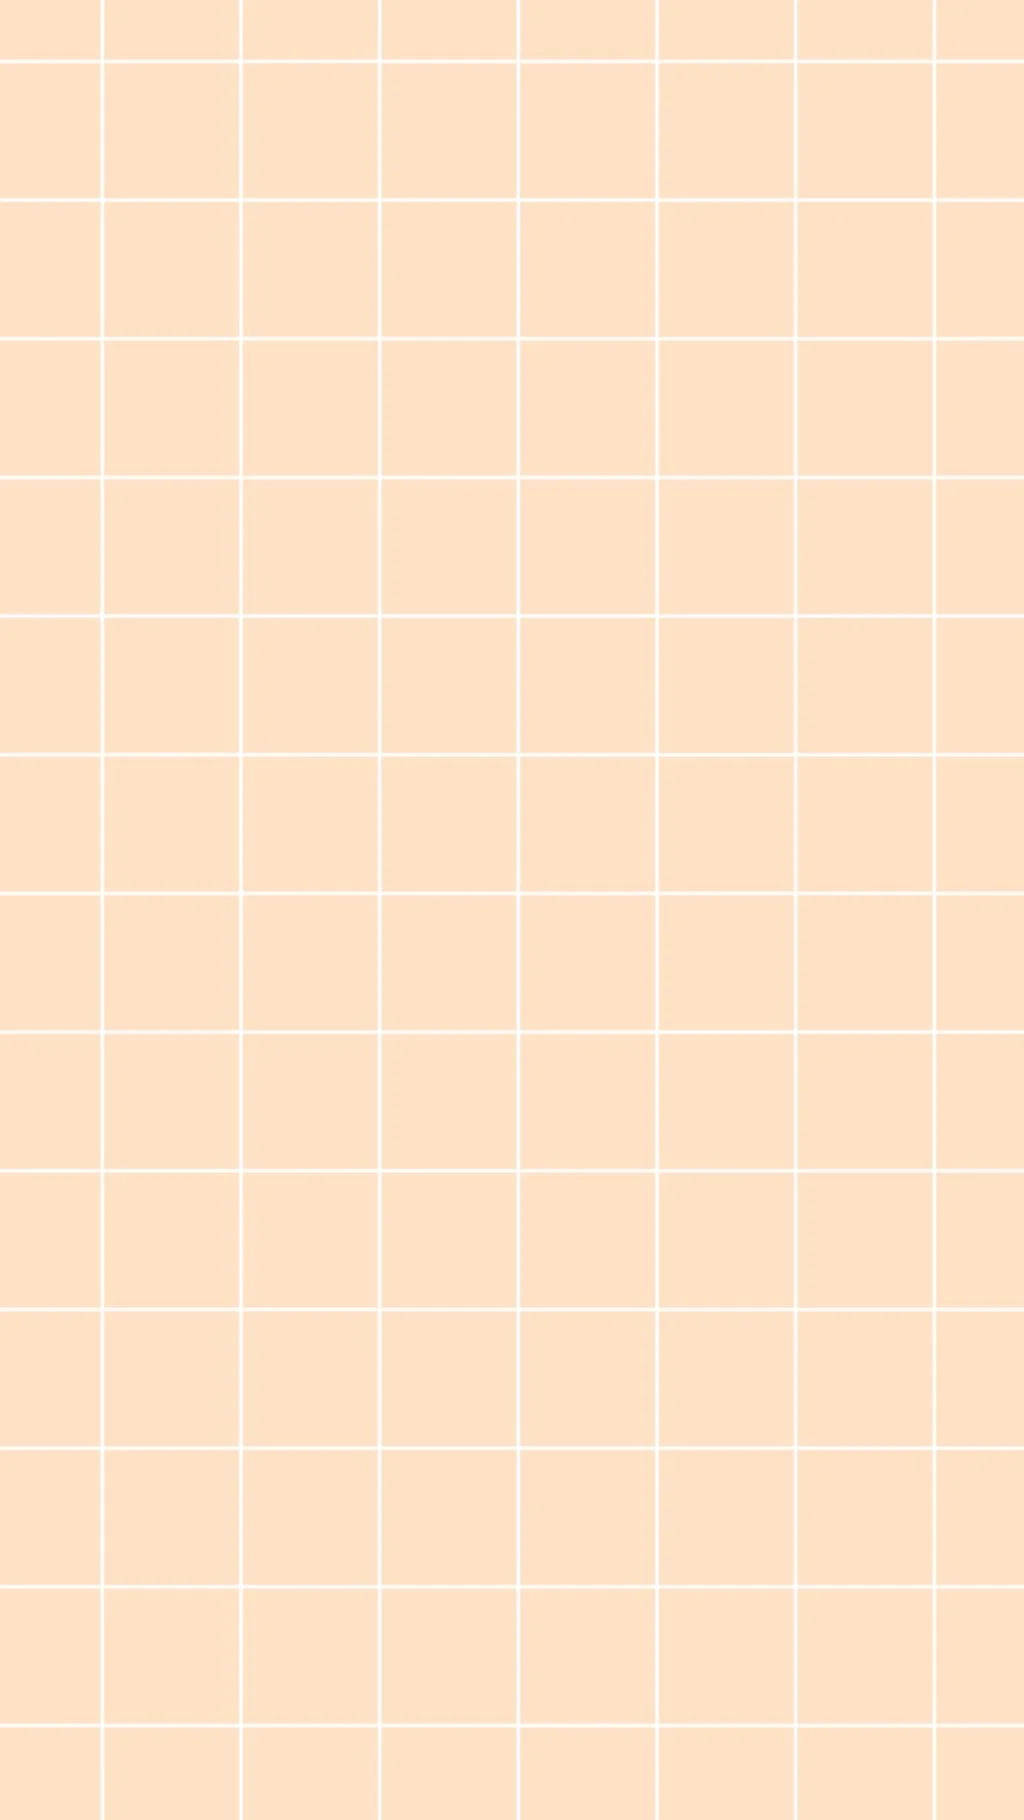 Simple Peach And White Grid Aesthetic Background